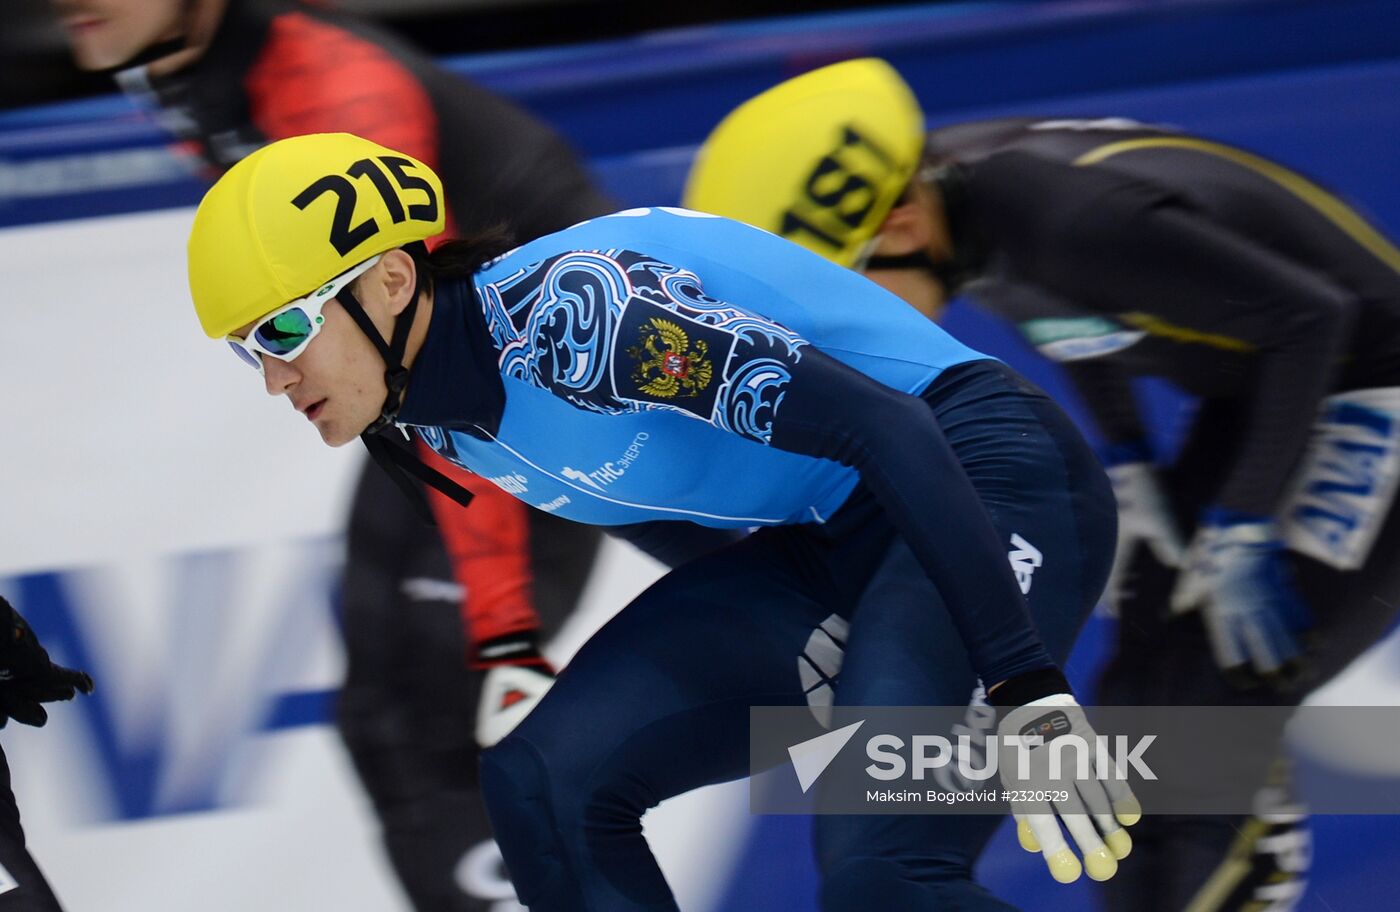 Short track. 4th stage of World Cup. Men's relay